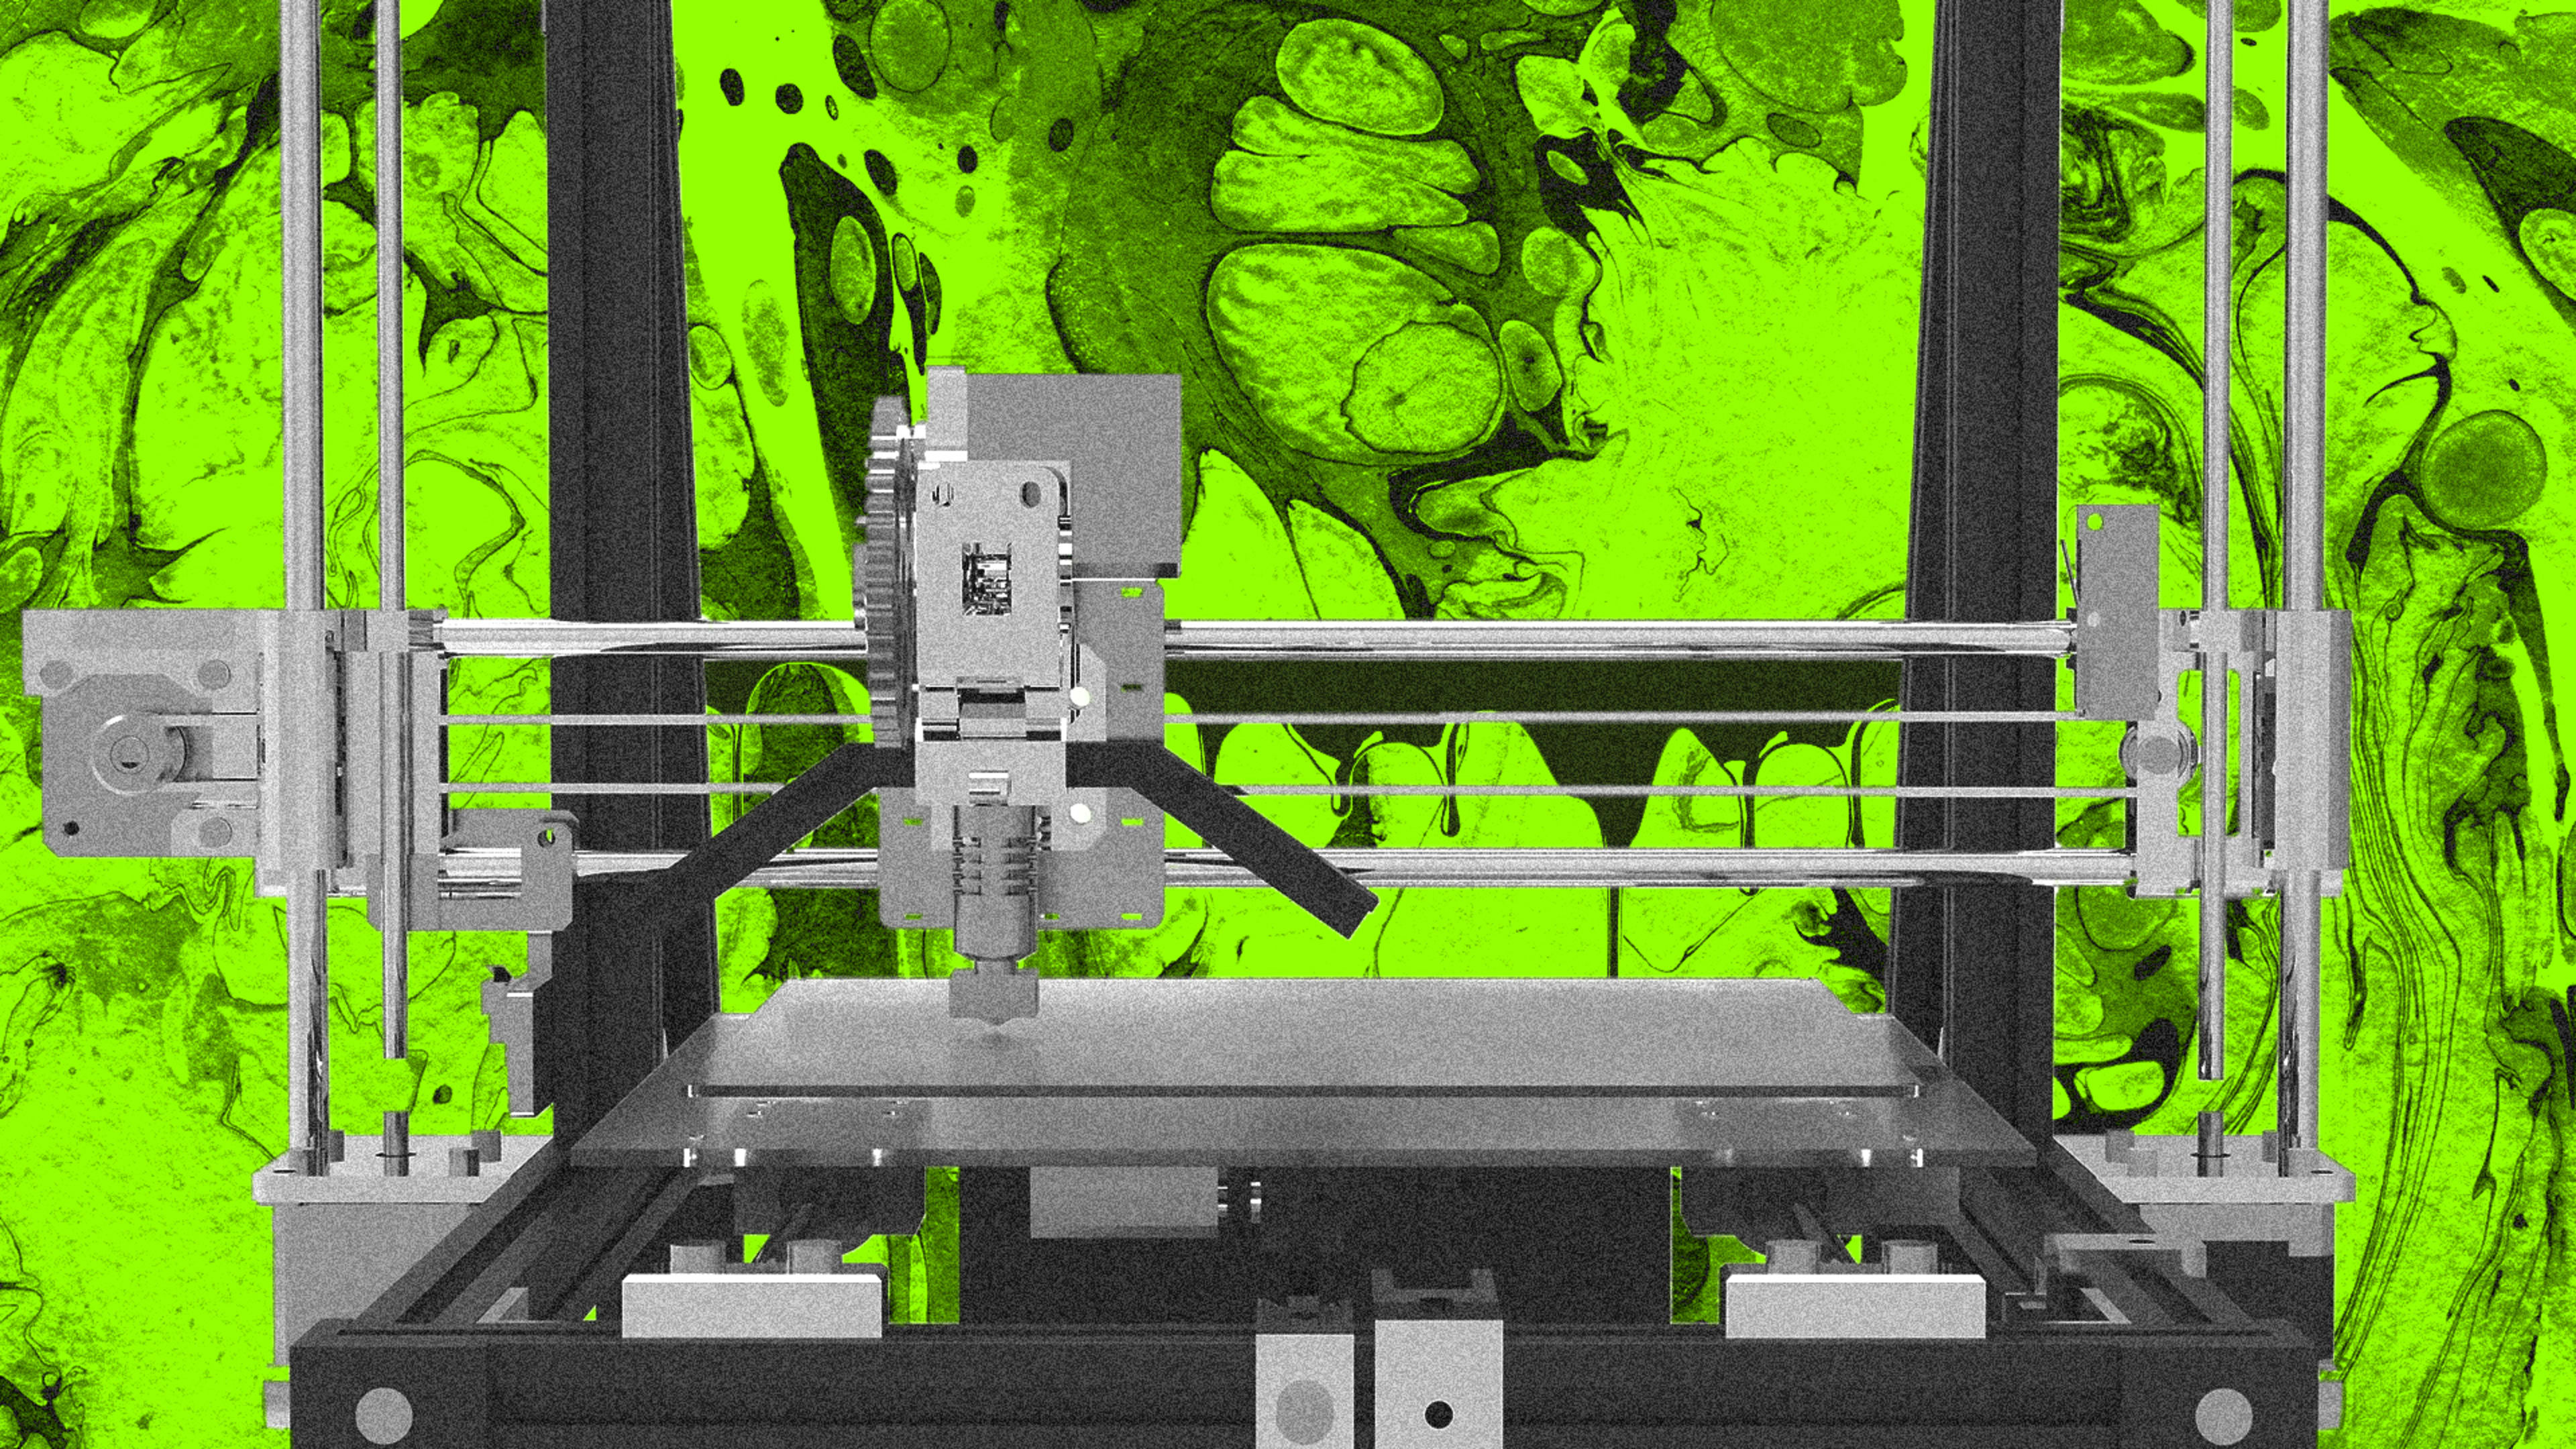 3D printing isn’t as green as you think